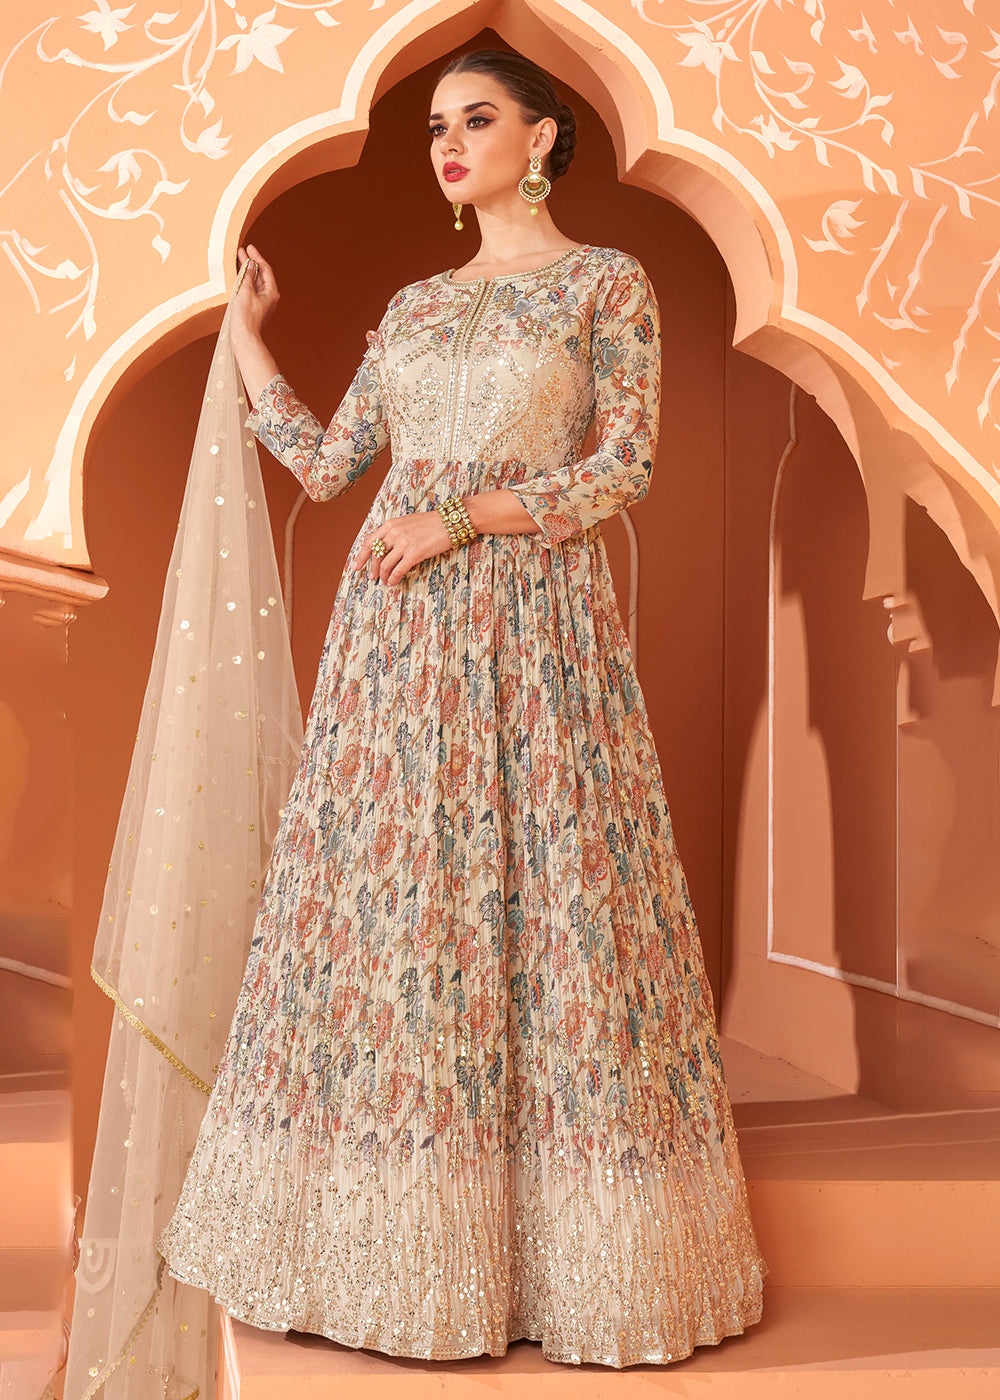 Buy Now Wedding Wear Floral Embroidered Beige Anarkali Suit Online in USA, UK, Australia, New Zealand, Canada & Worldwide at Empress Clothing.